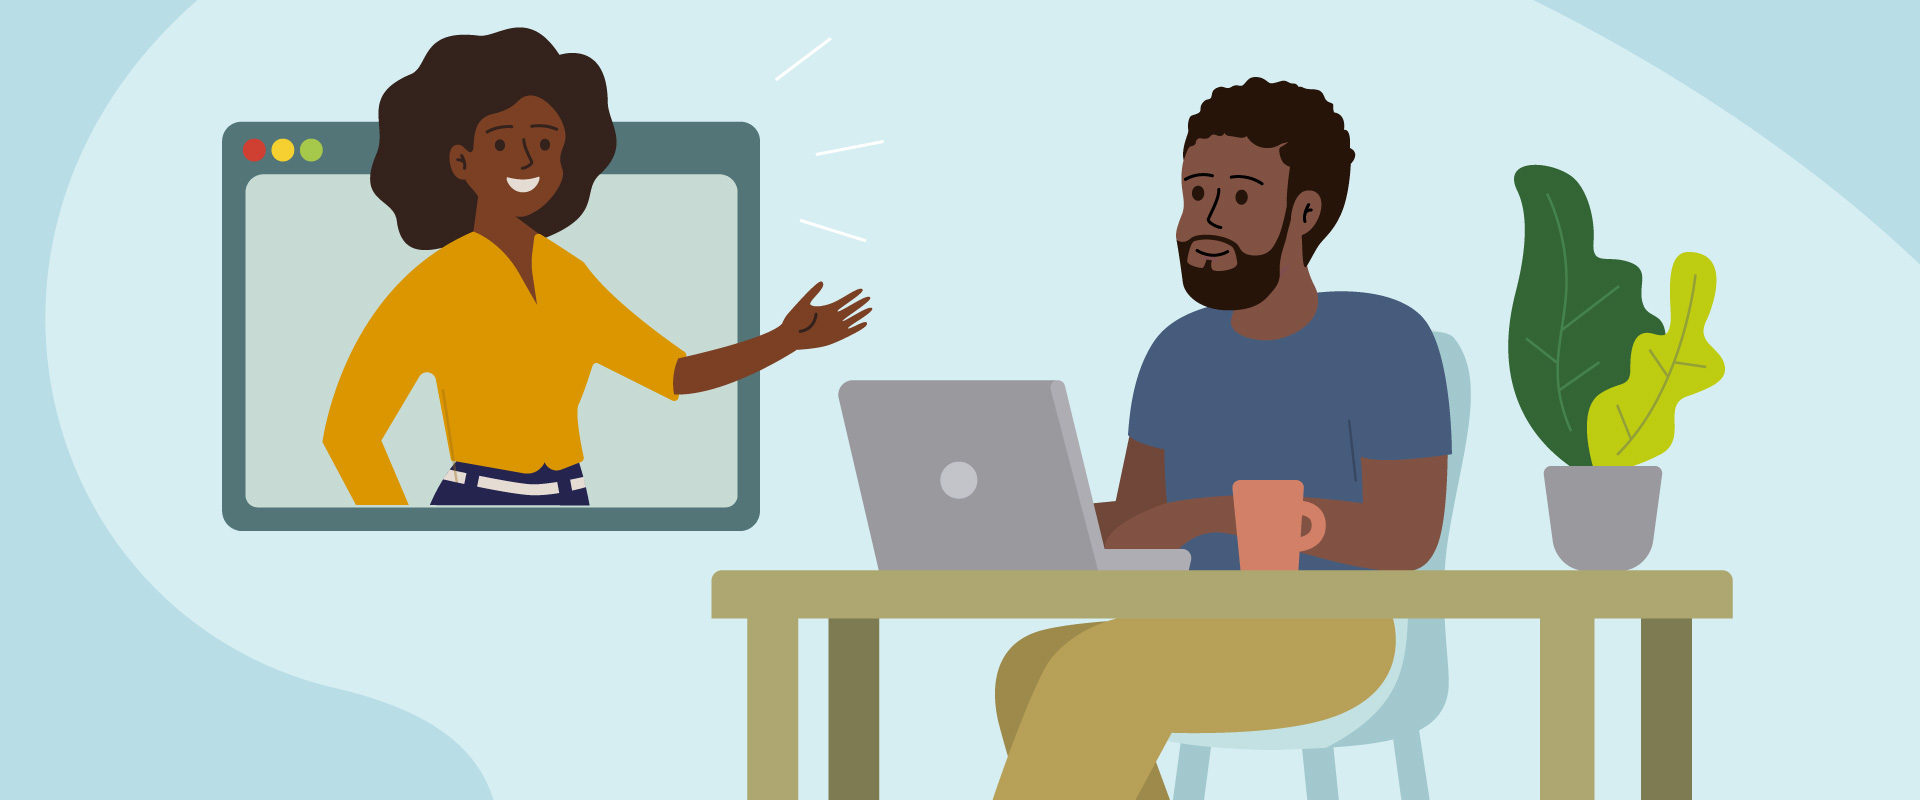 Illustration of two Black characters on a video call.